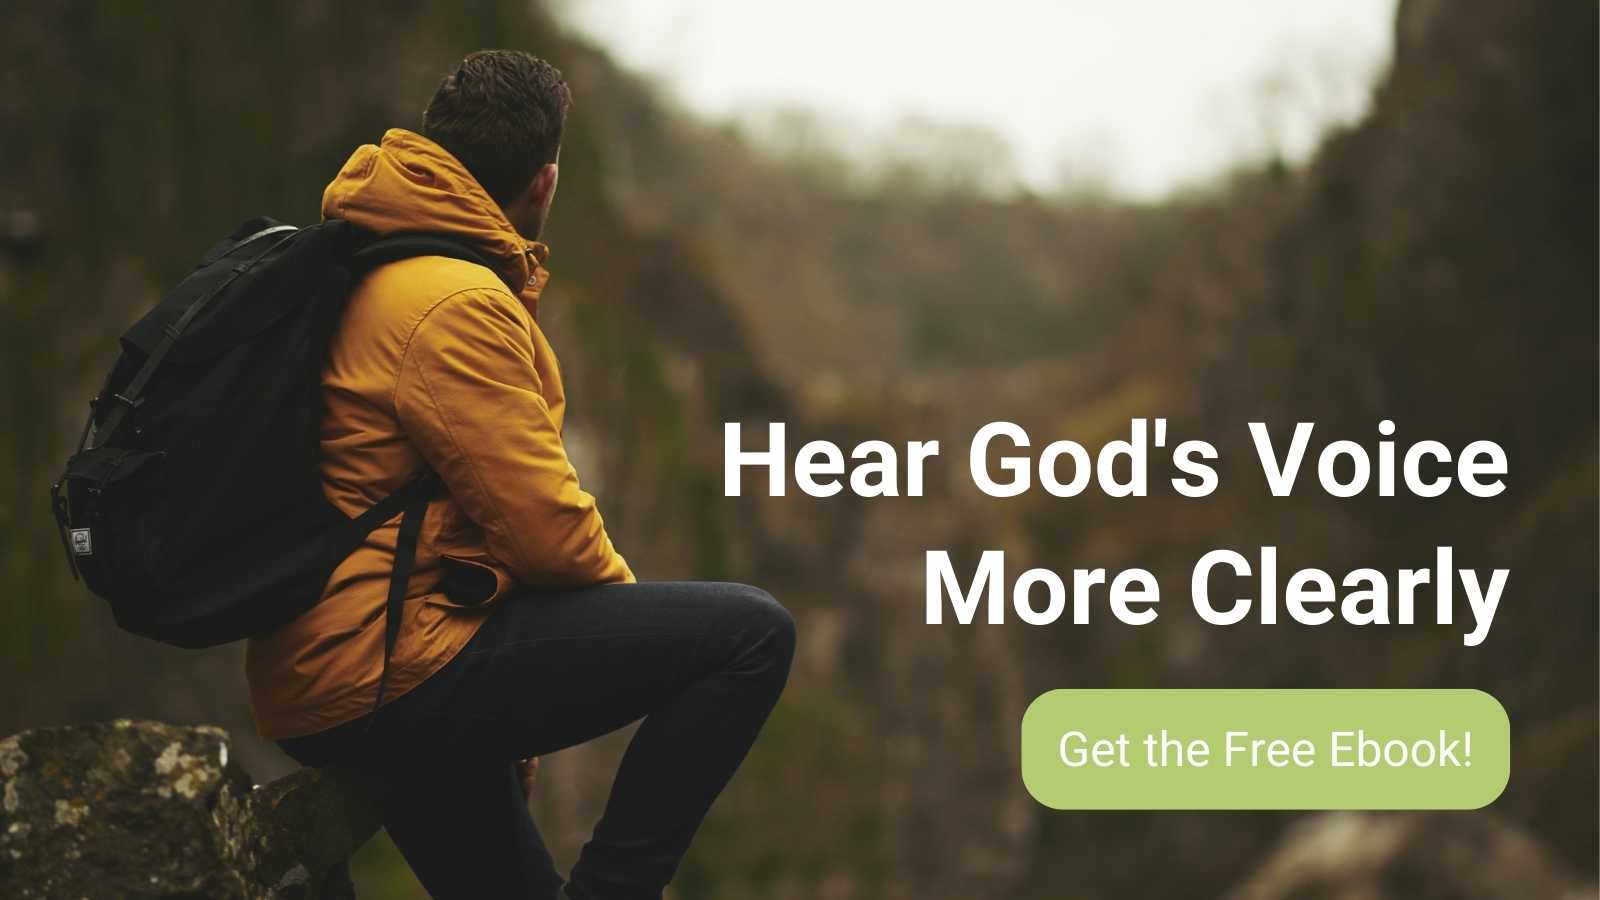 How to Hear God's Voice More Clearly